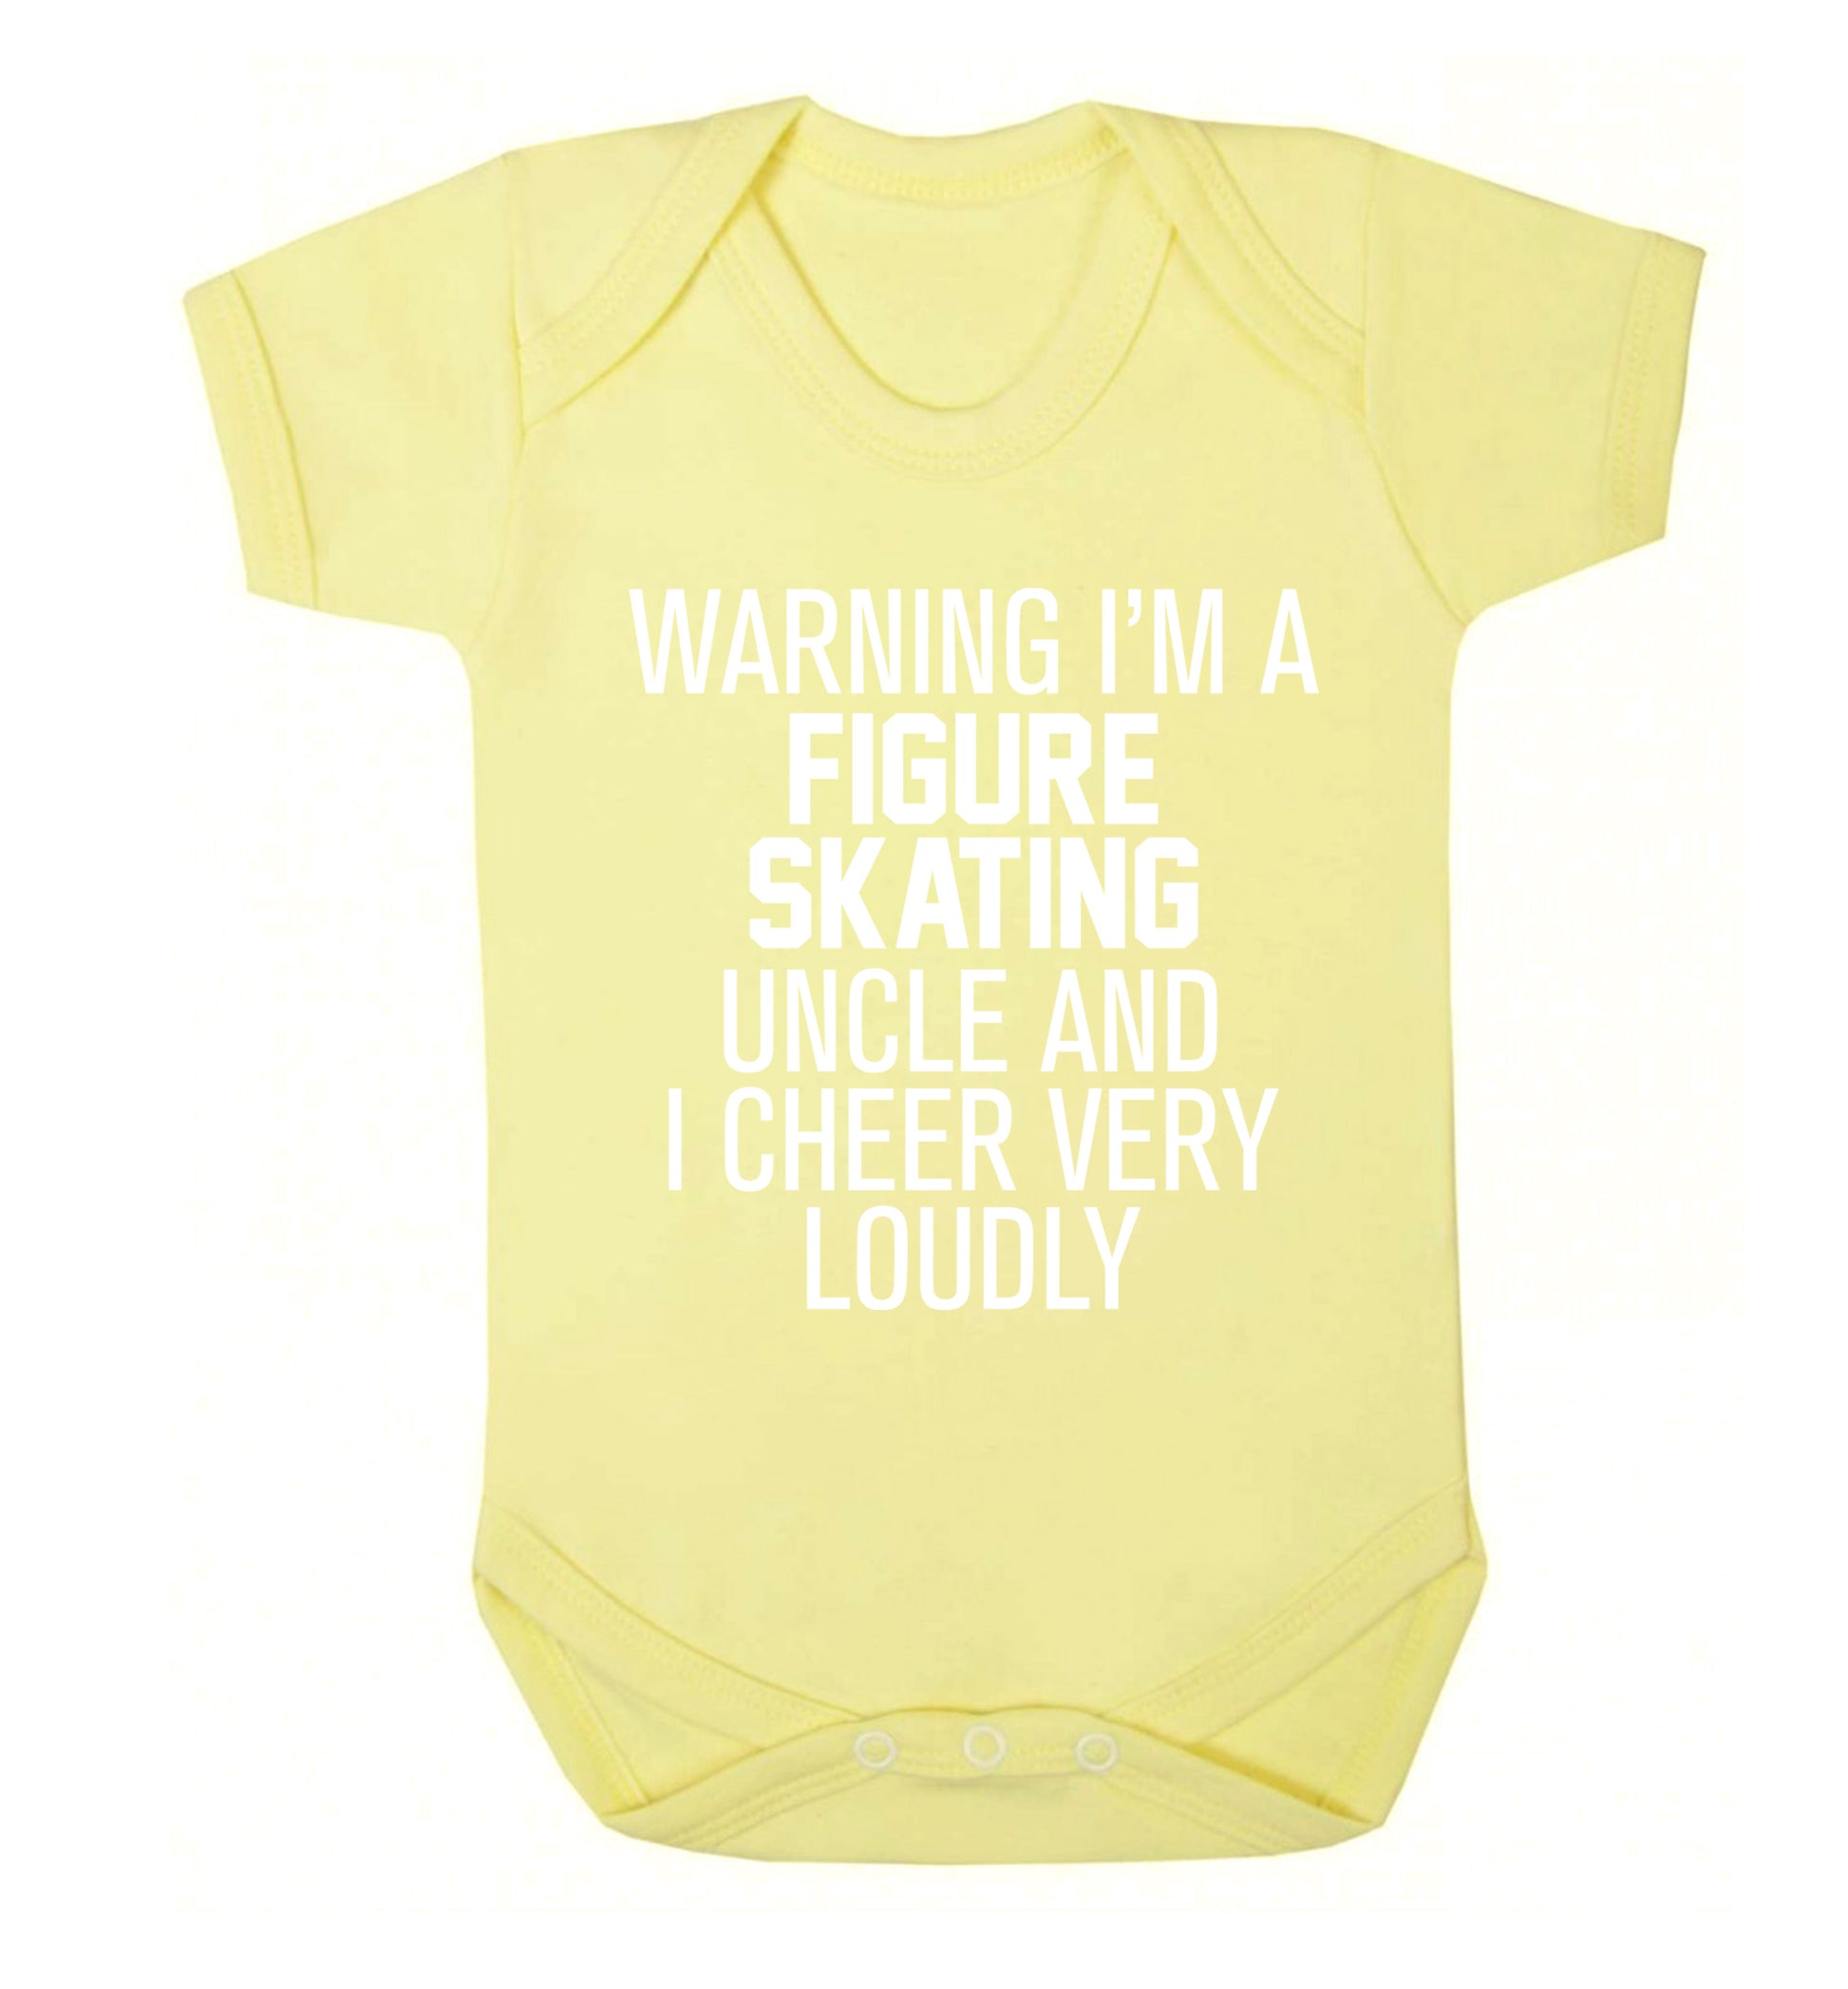 Warning I'm a figure skating uncle and I cheer very loudly Baby Vest pale yellow 18-24 months